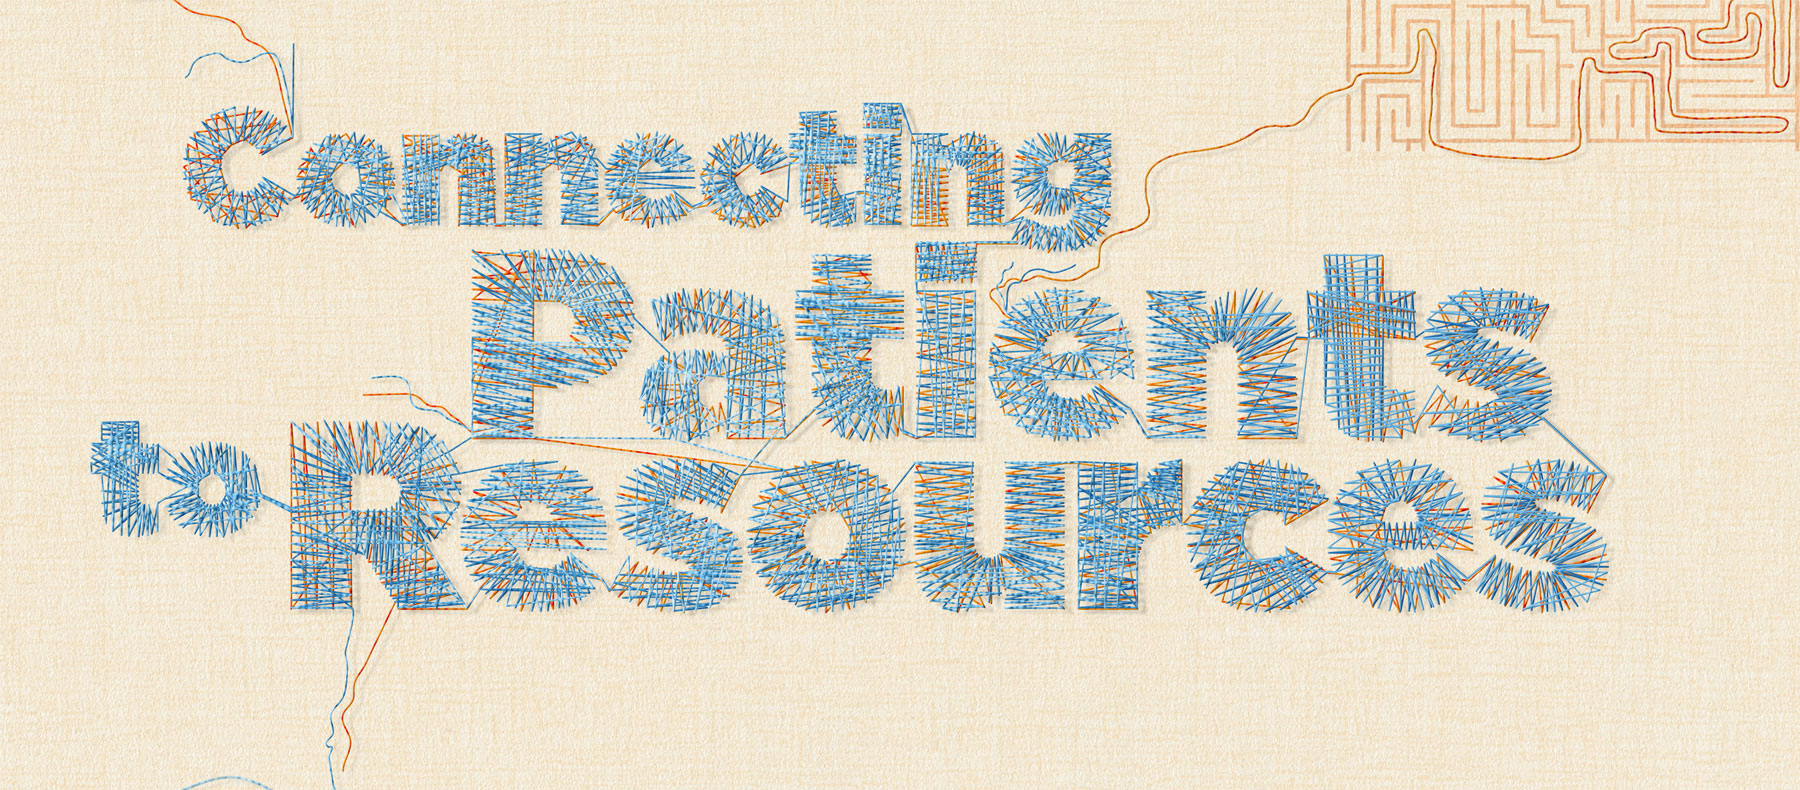 Connecting patients to resources